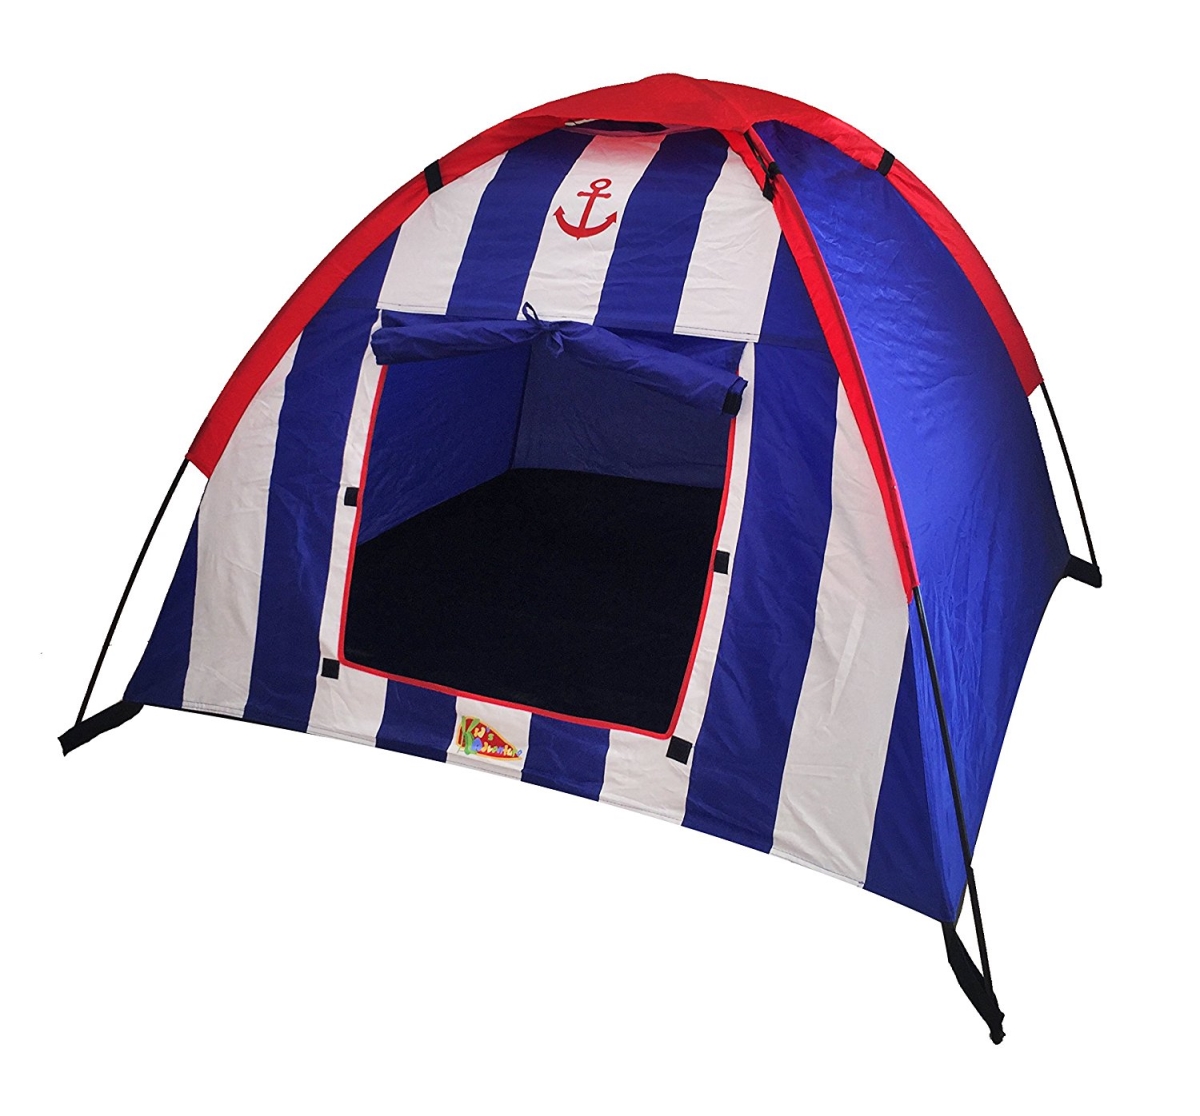 34 X 48 X 48 In. Striped Dome Tent - Blue, Red & White